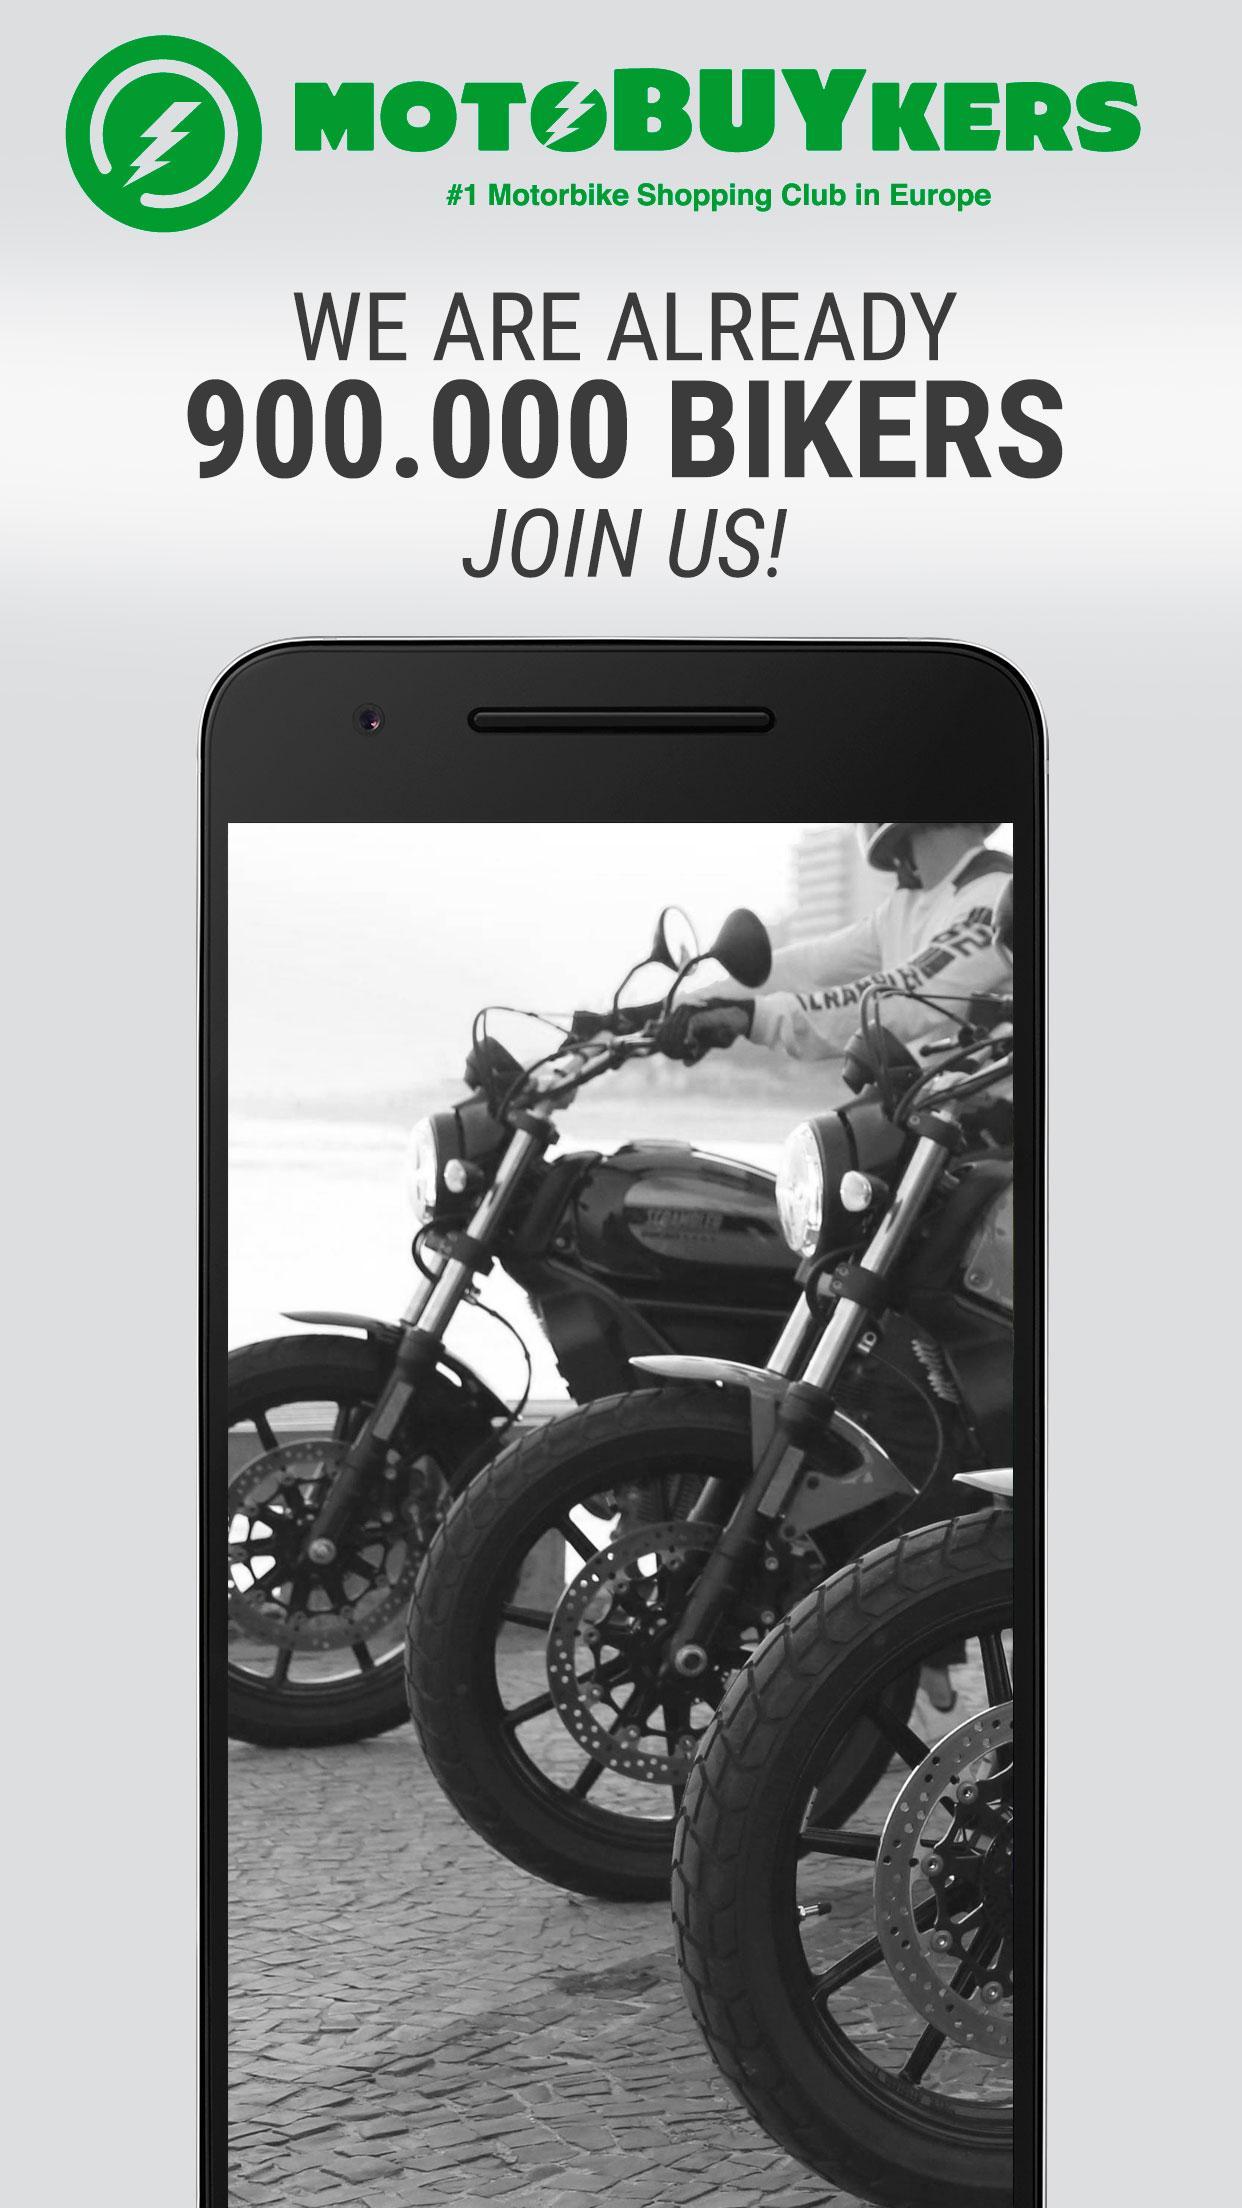 Motobuykers for Android - APK Download